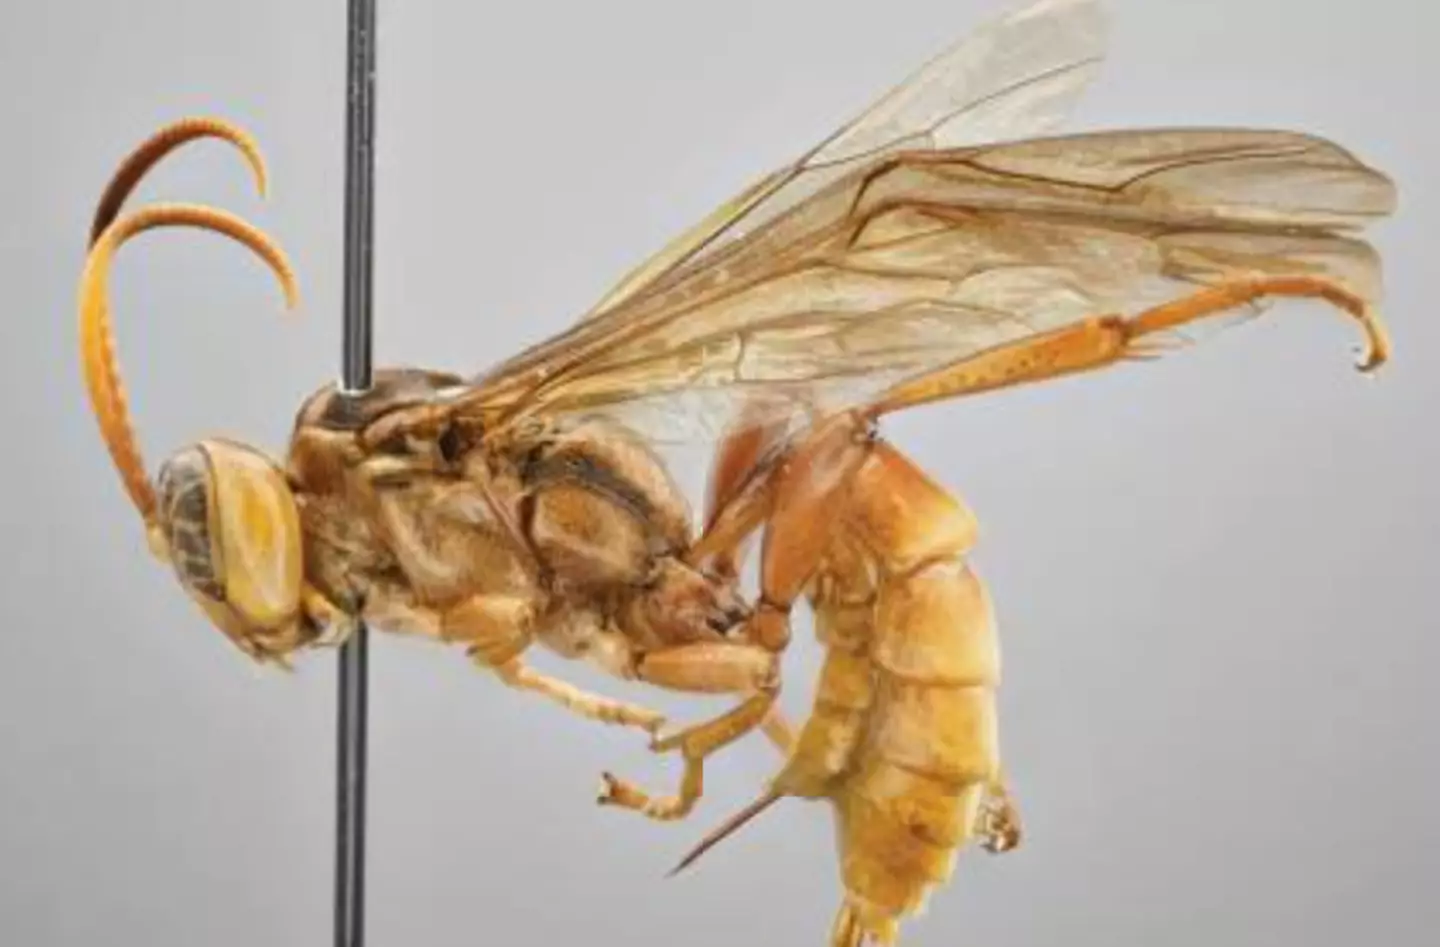 A new alien-like wasp has been discovered.